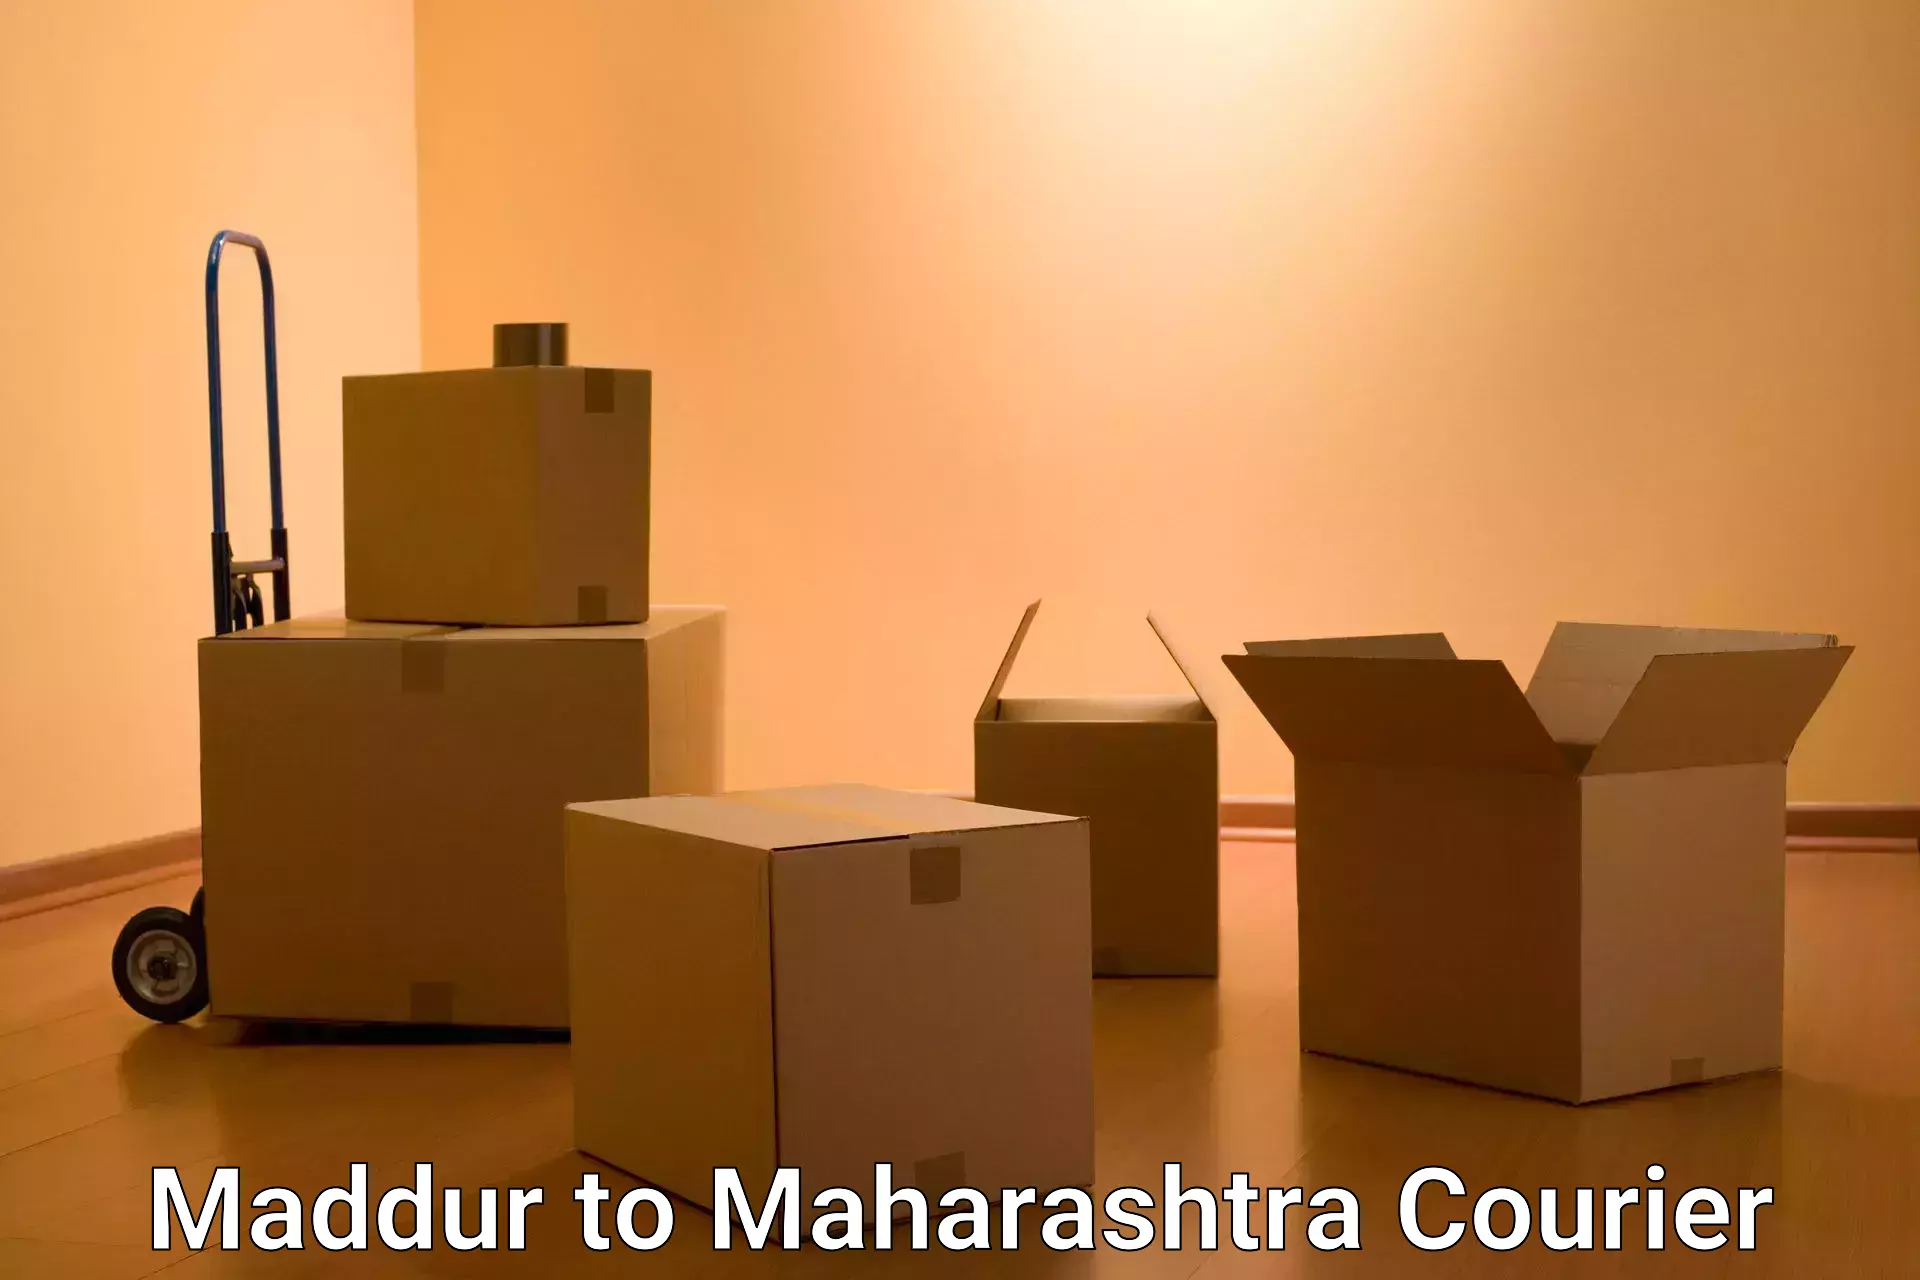 Parcel service for businesses in Maddur to Pirangut